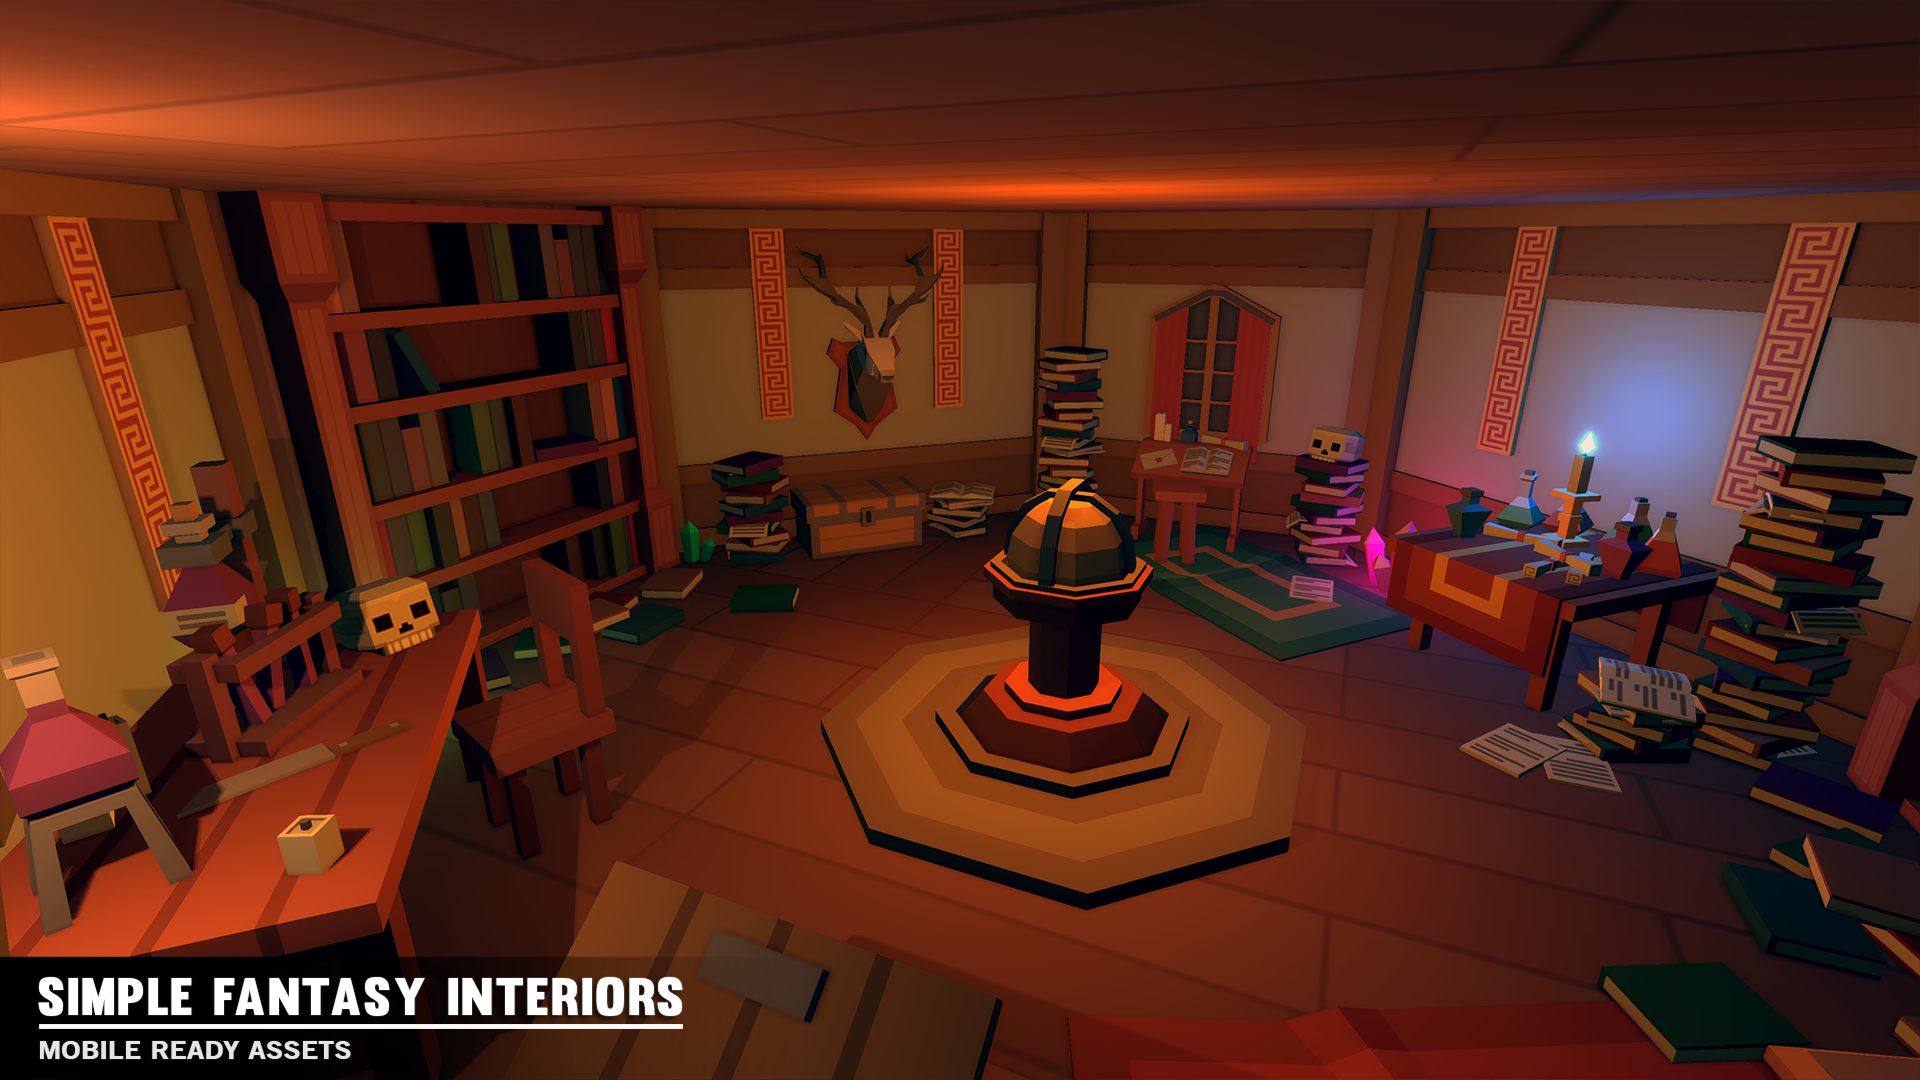 Simple Fantasy Interiors - Cartoon Assets - Synty Studios - Unity and Unreal 3D low poly assets for game development